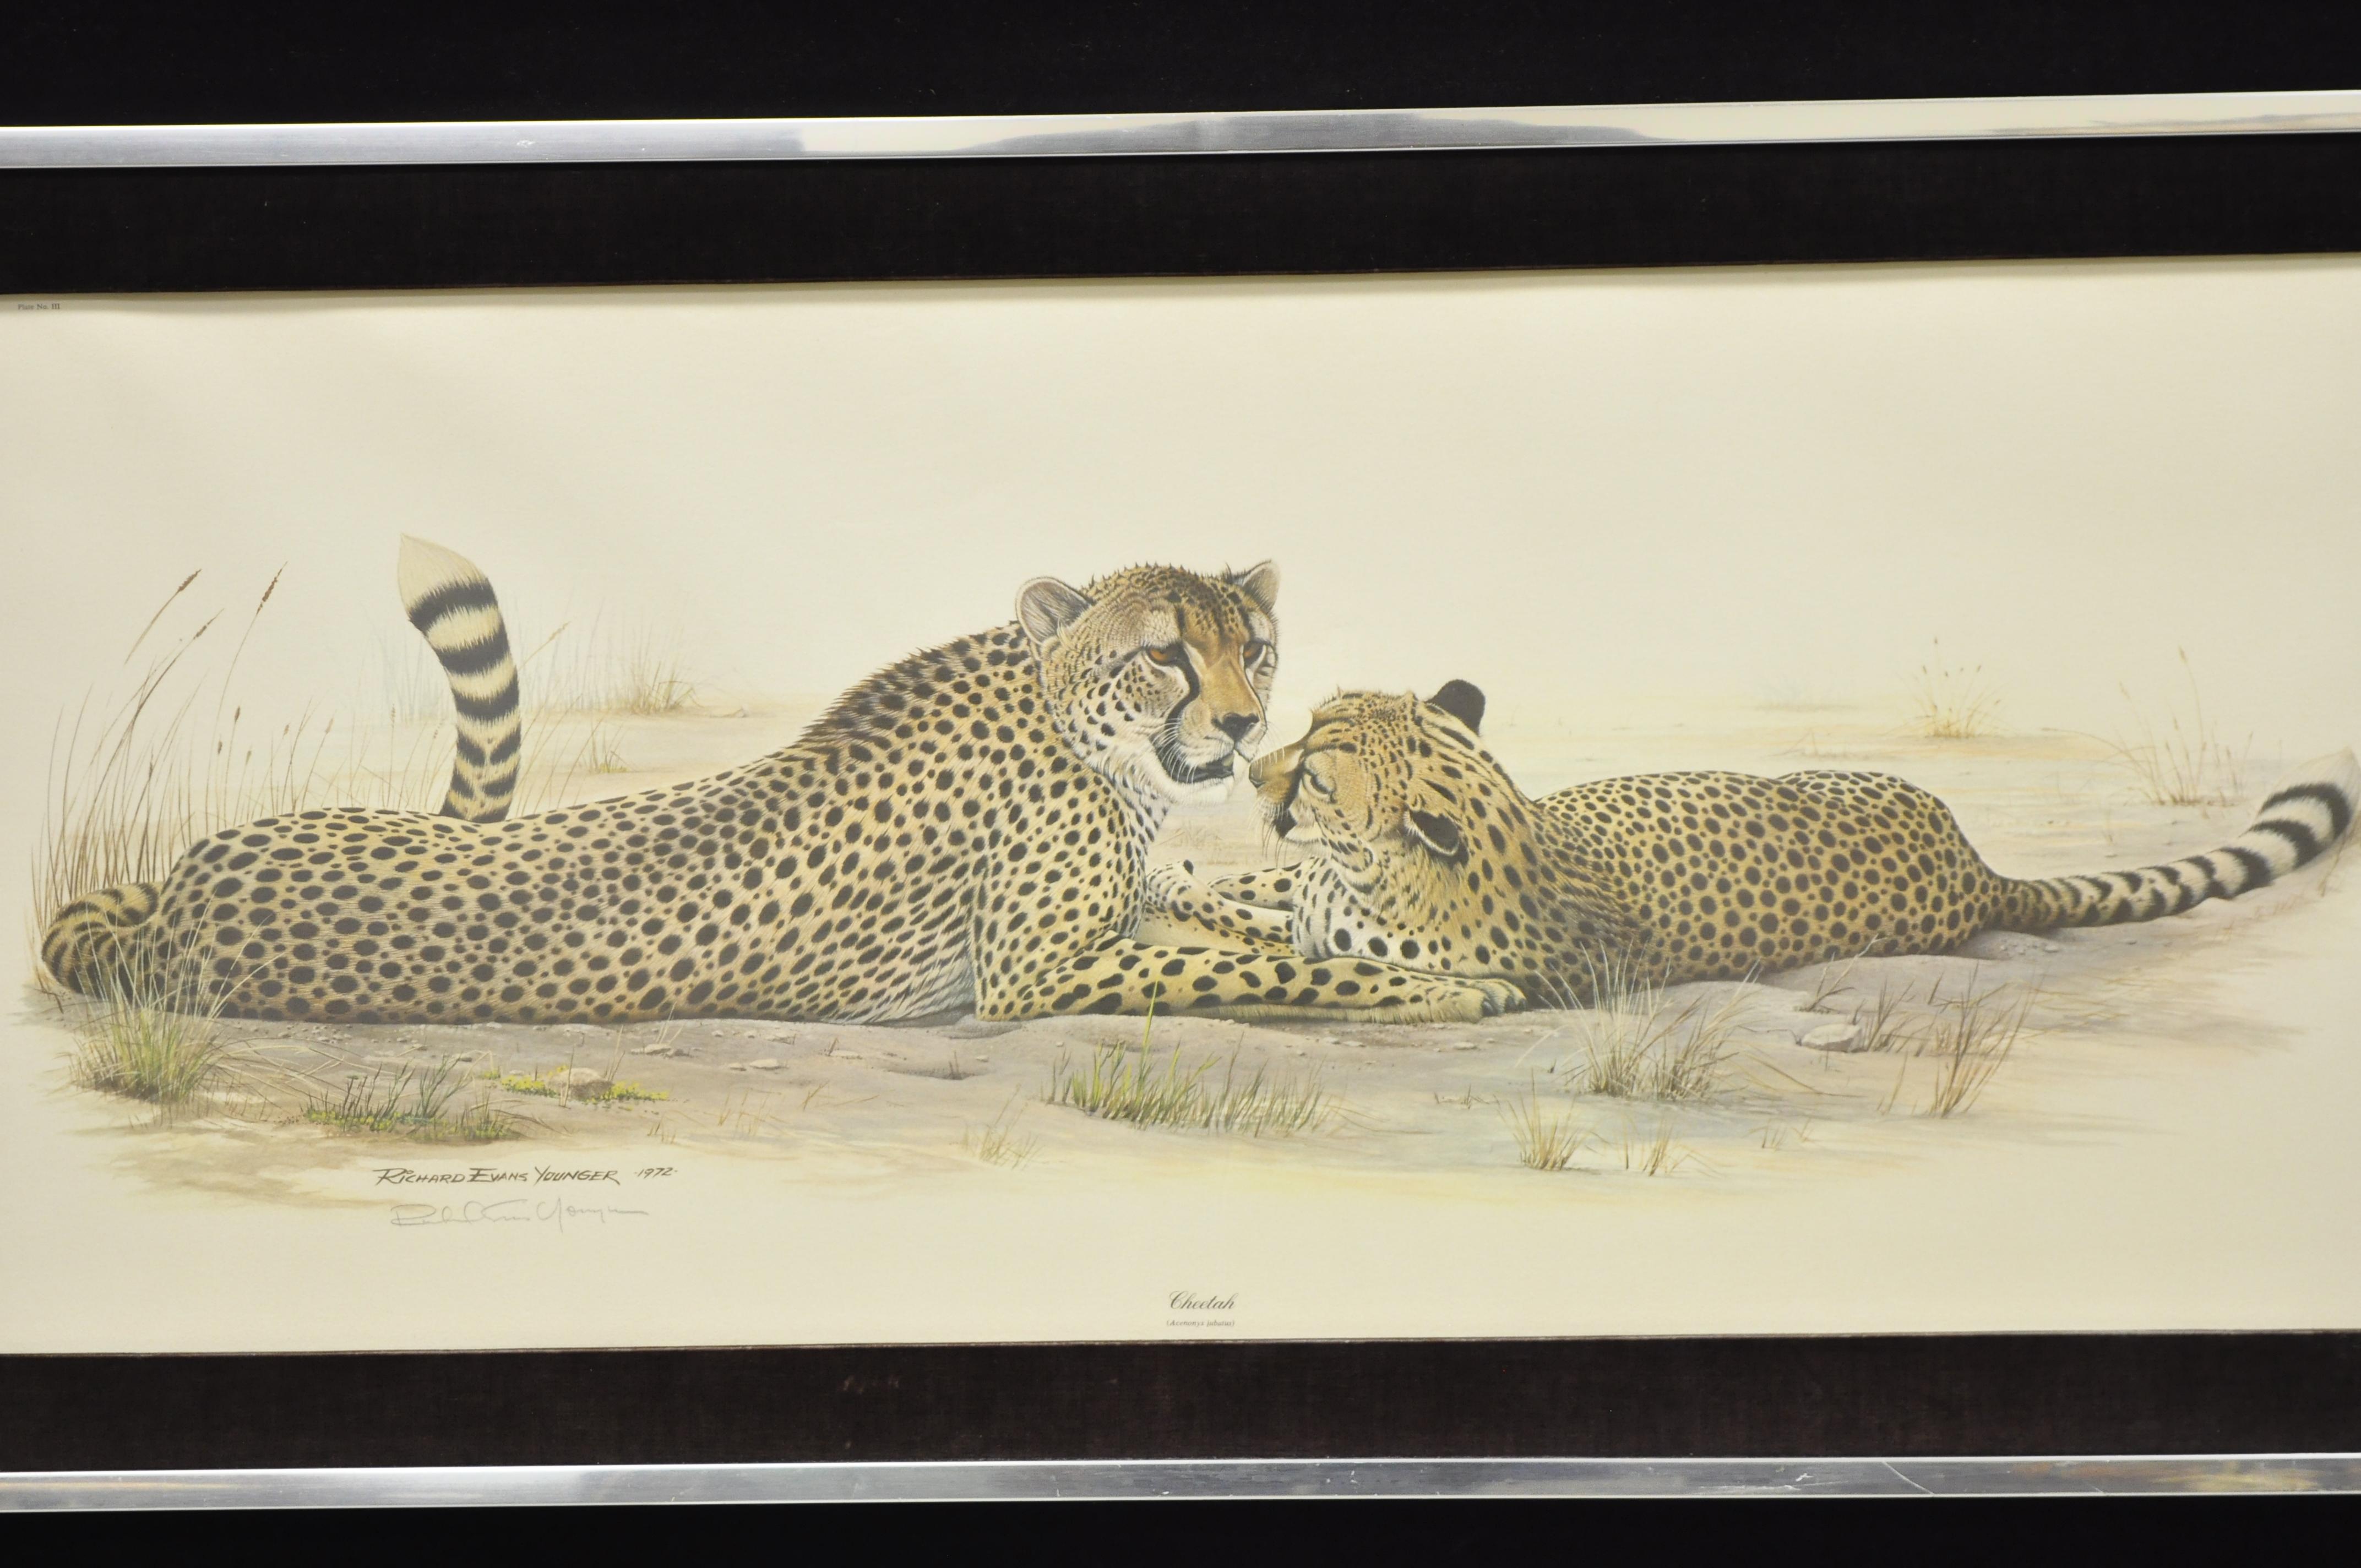 1972 Cheetah lithograph Art by Richard Evans Younger in velvet chrome frame. Item features artist signed and dated to bottom corner, large impressive size, velvet and chrome frame, very nice vintage item, quality American craftsmanship, great style